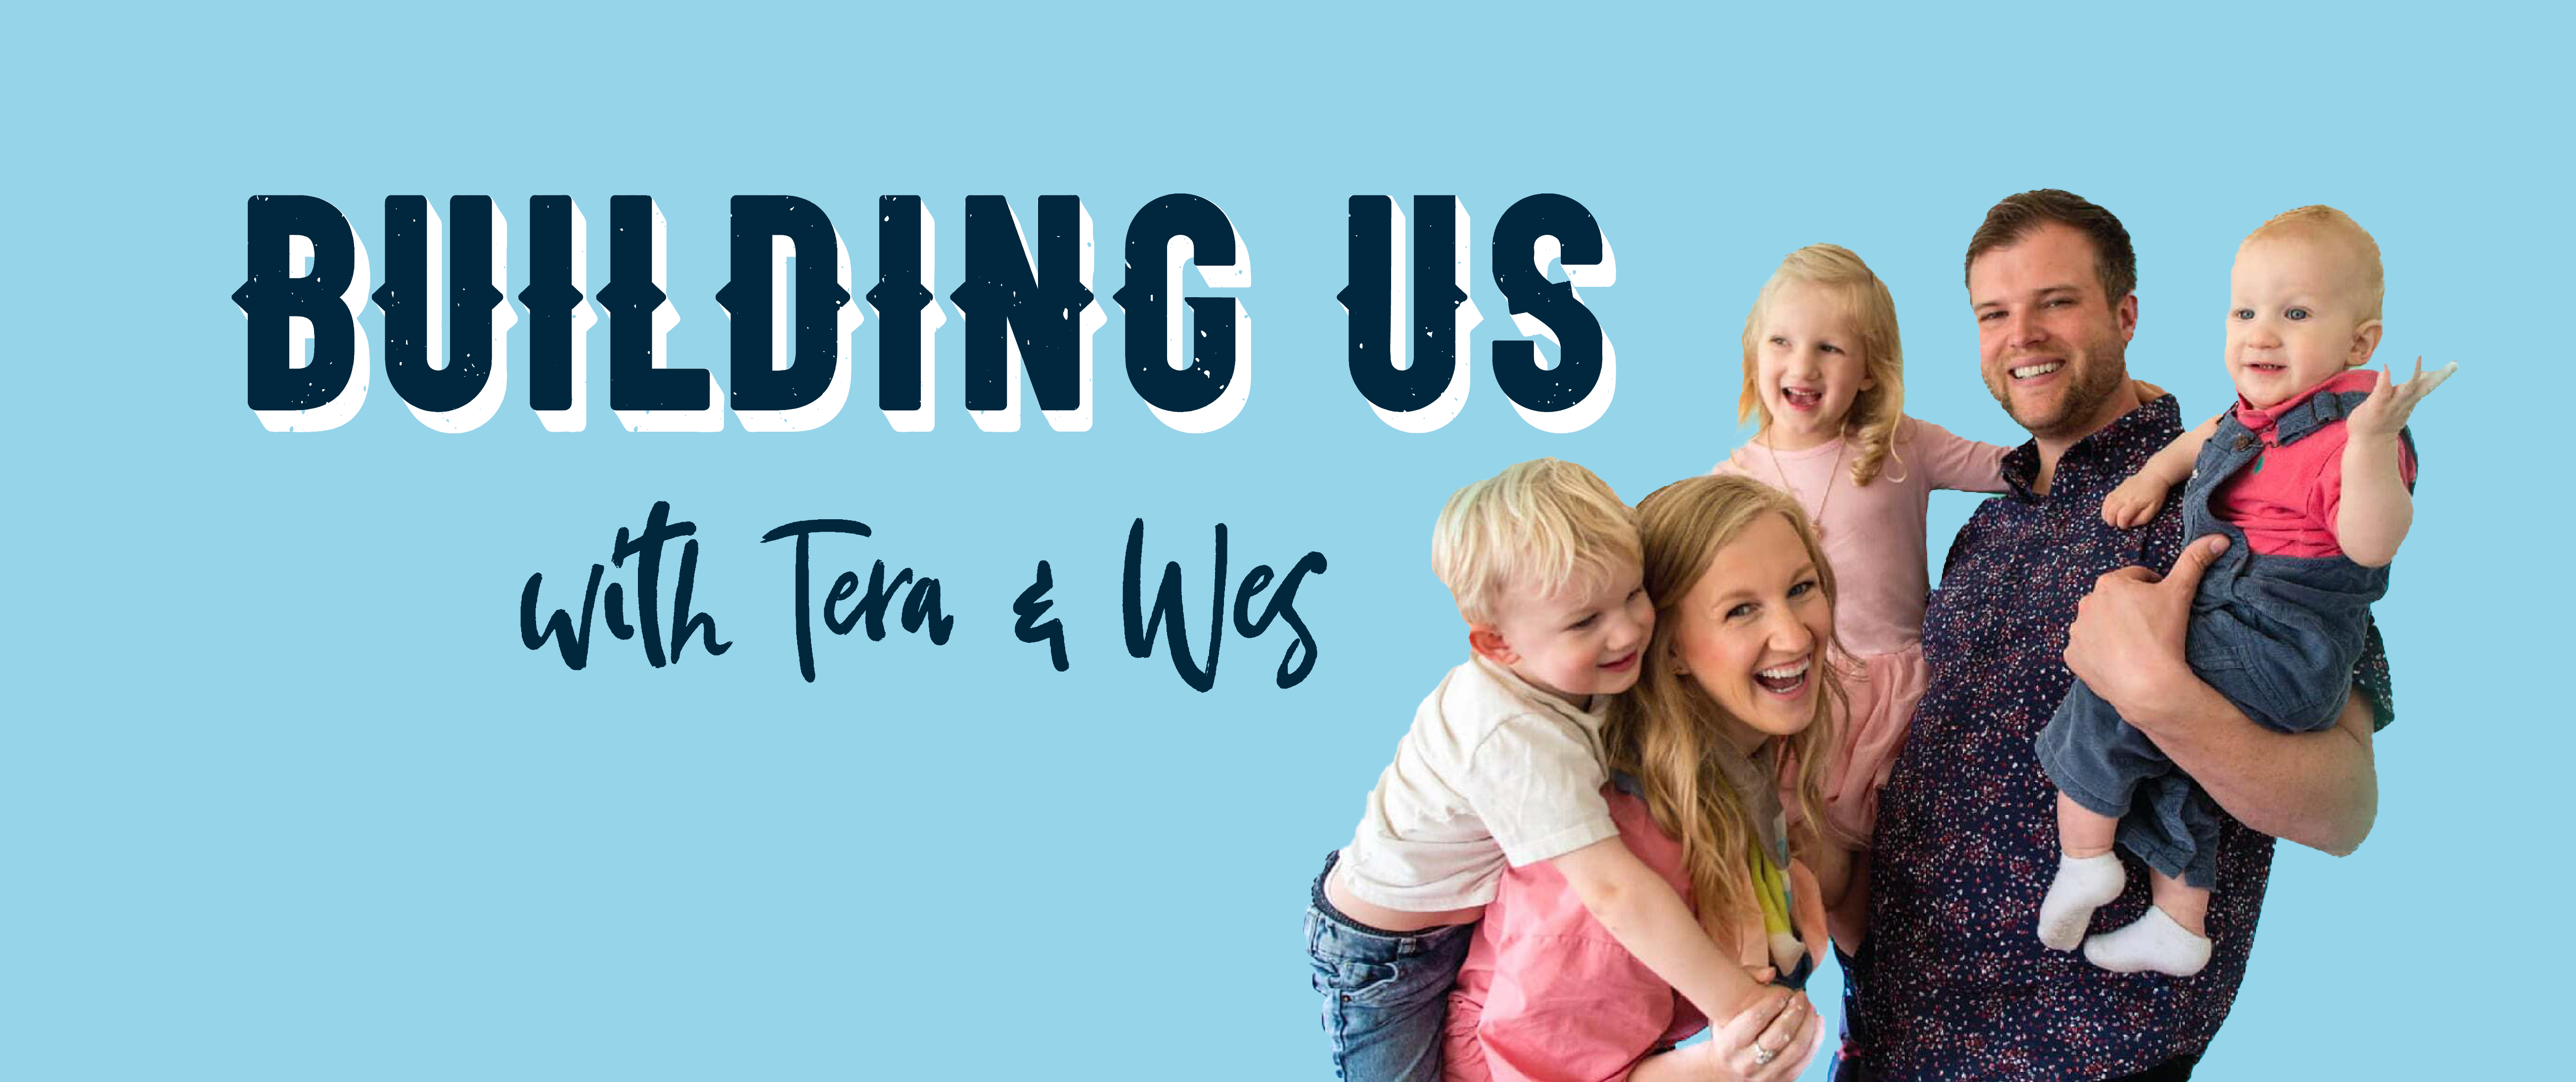 Tera and Wes - Building Us